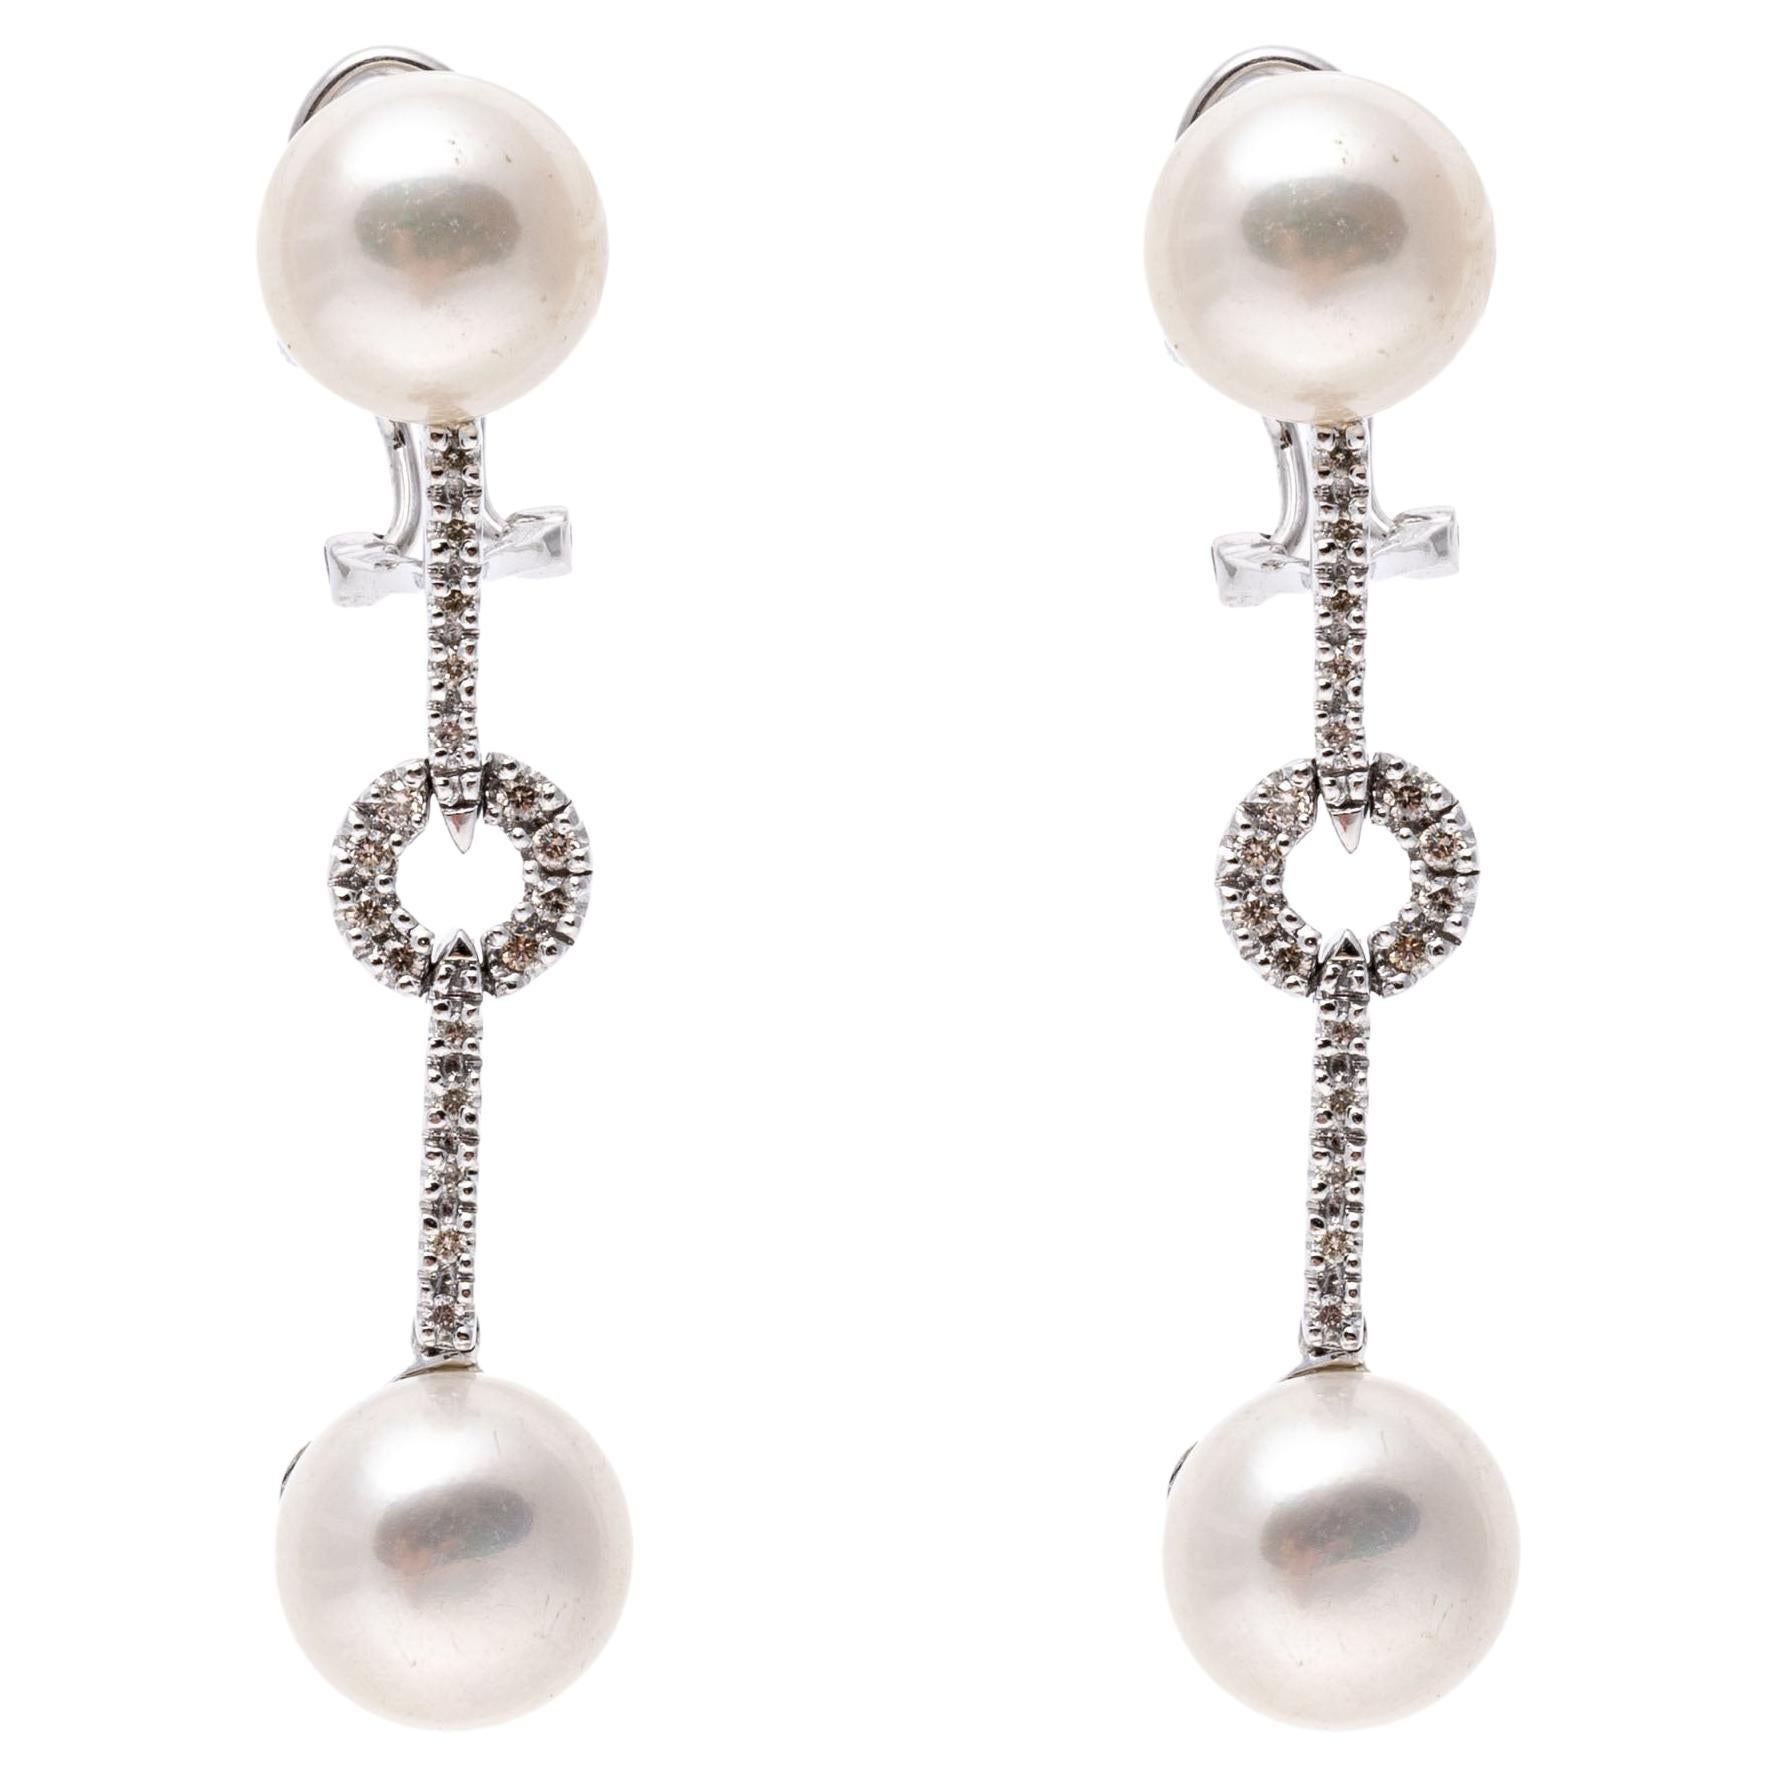 14K White Gold Drop Style Earrings with Pearls and Diamonds